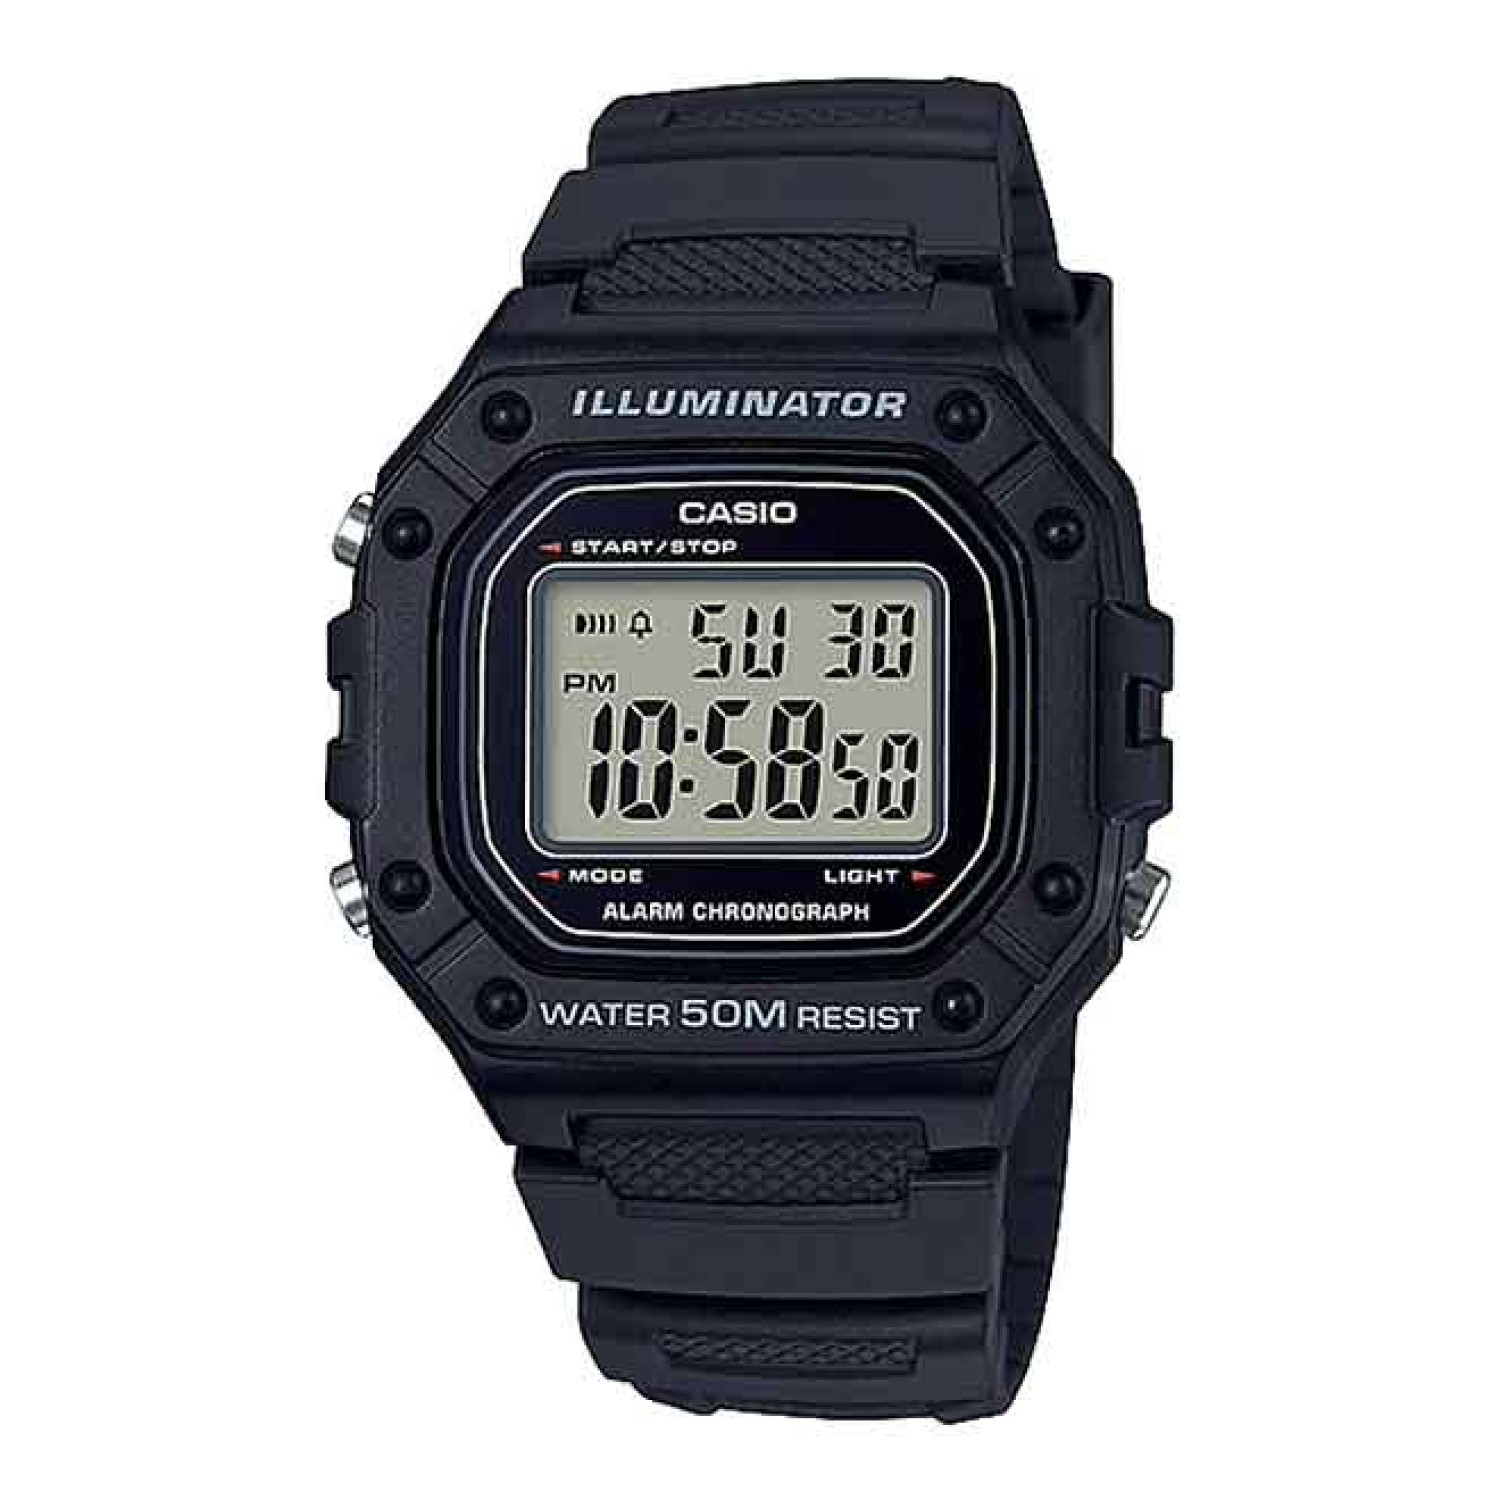 W218H-1A Casio Alarm Chronograph Watch. A standard Caio digital watch in traditional styling. 50 Metres water resist at a great price with 2 year guarantee. 2 Year Casio Guarantee which is only available at authorised New Zealand Casio Stockists. 3 Months